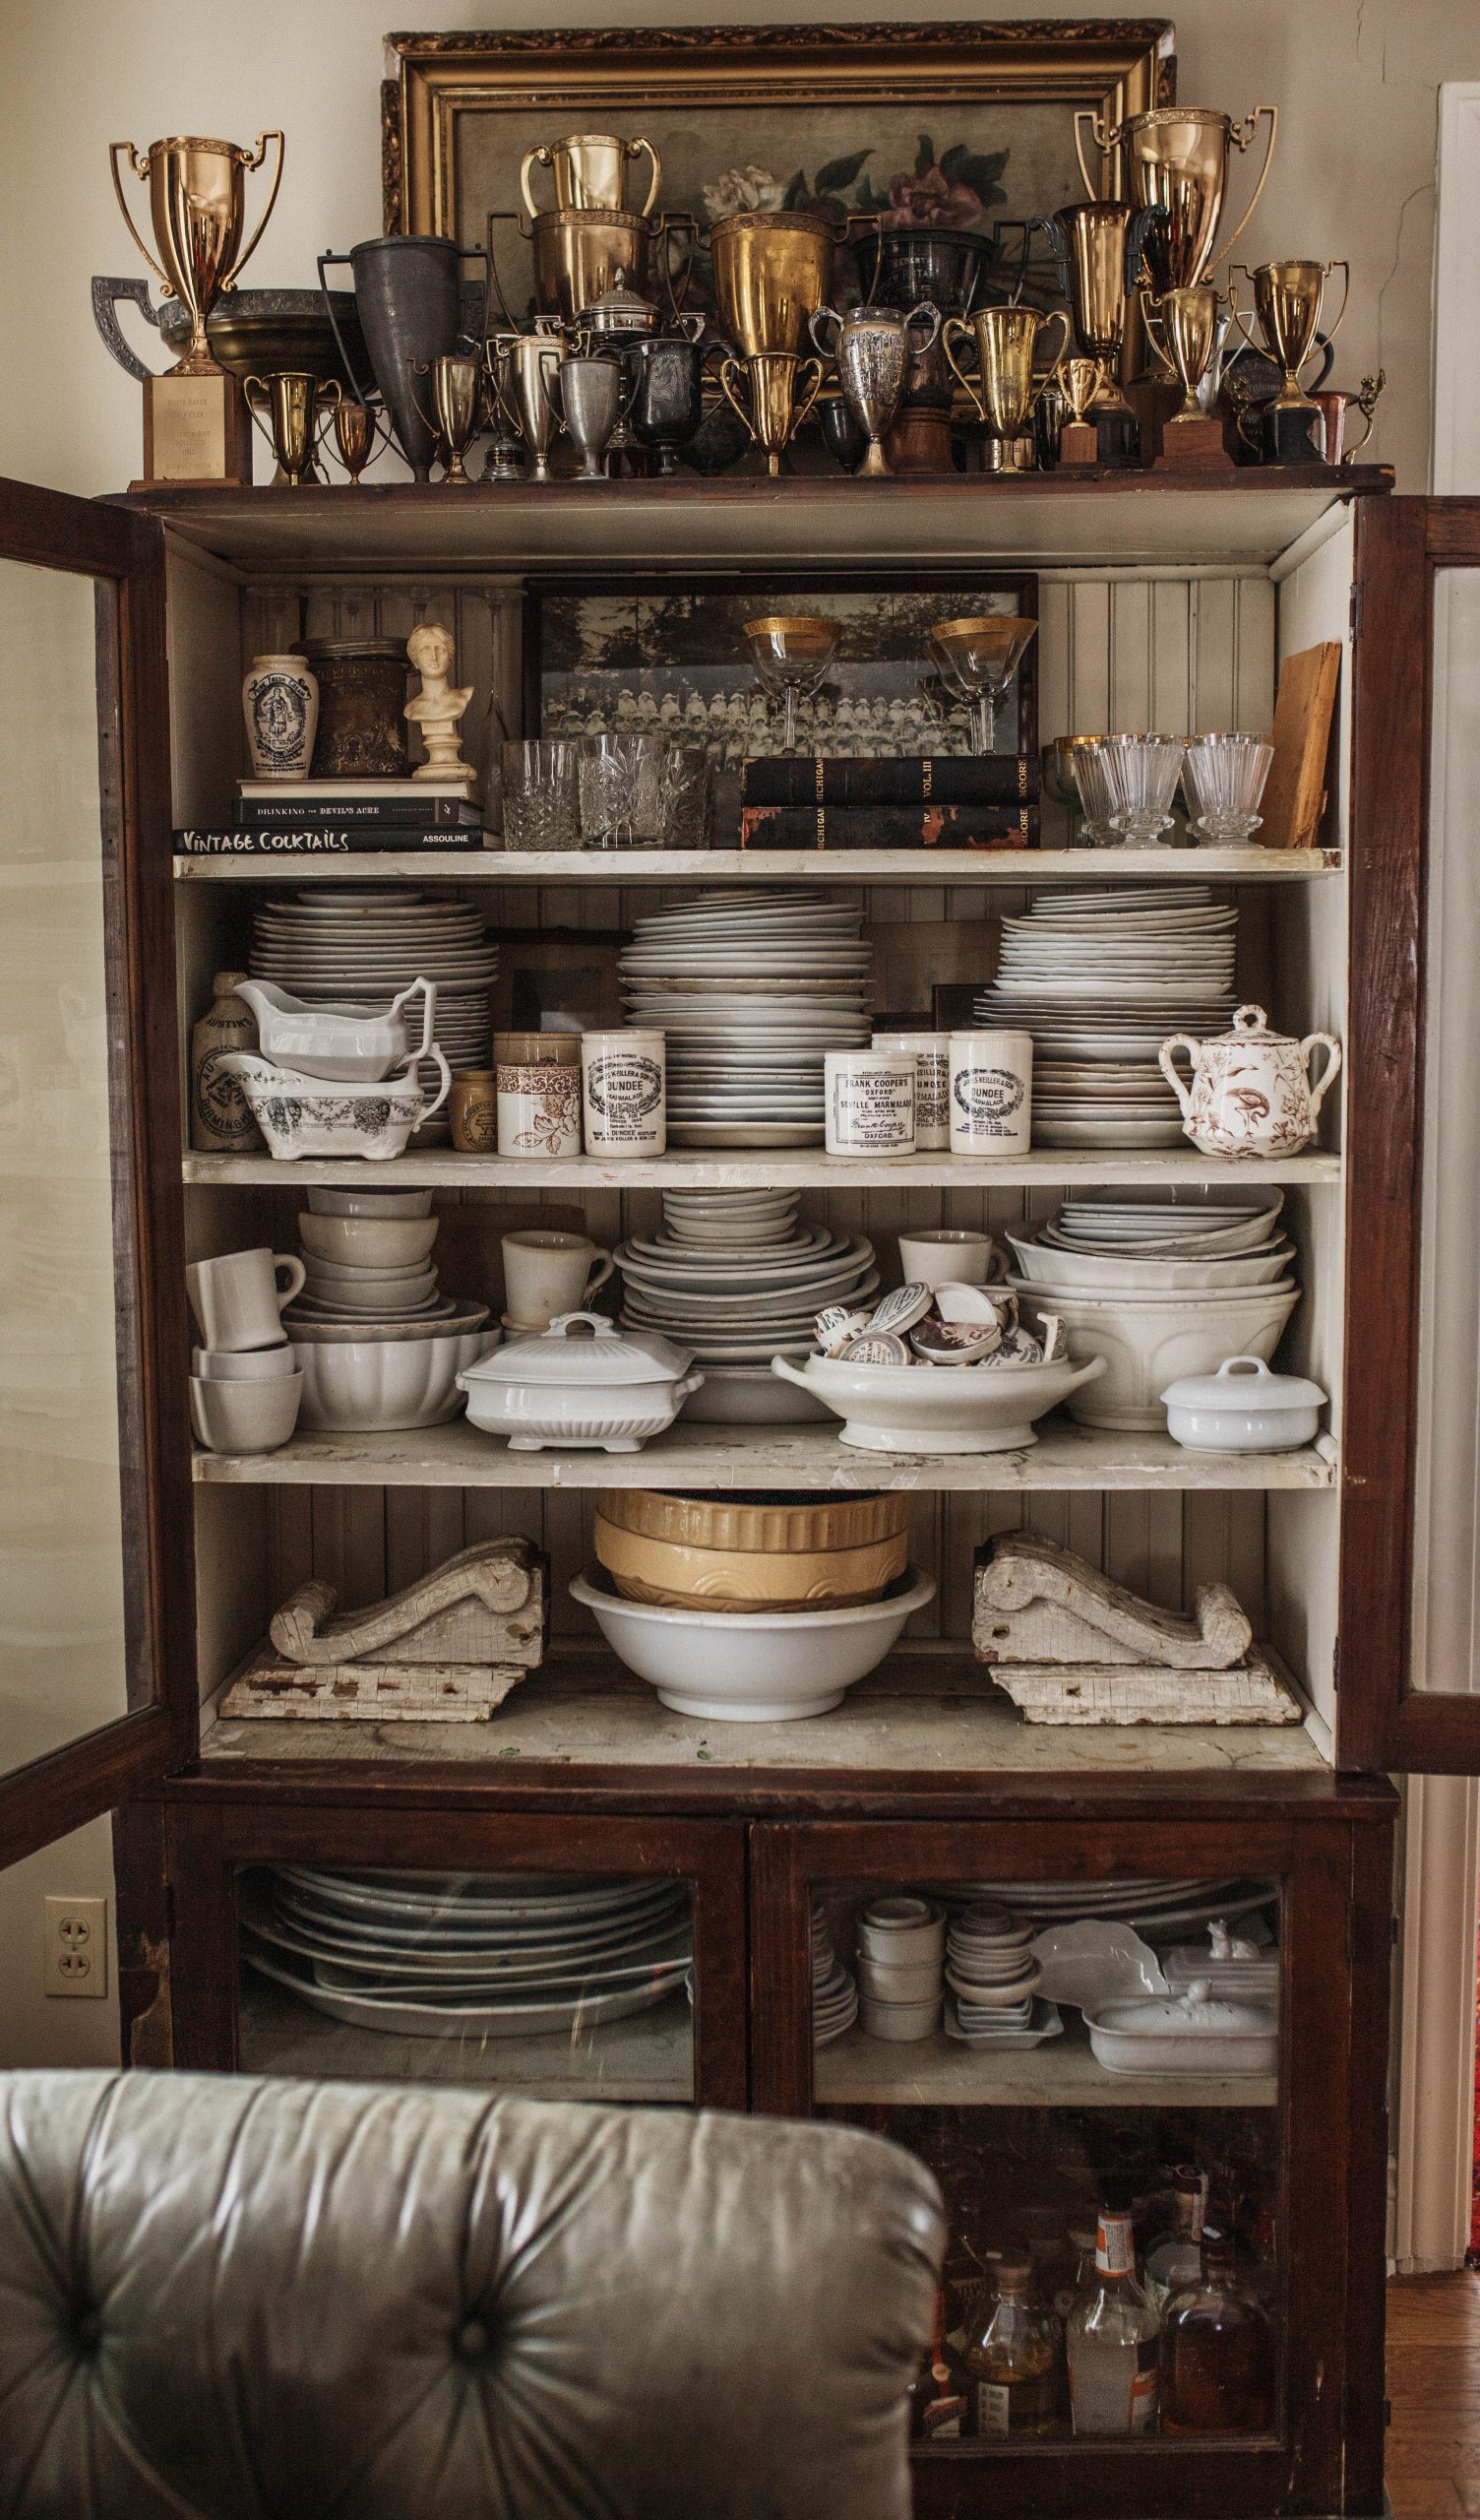 How to find English Antique Containers